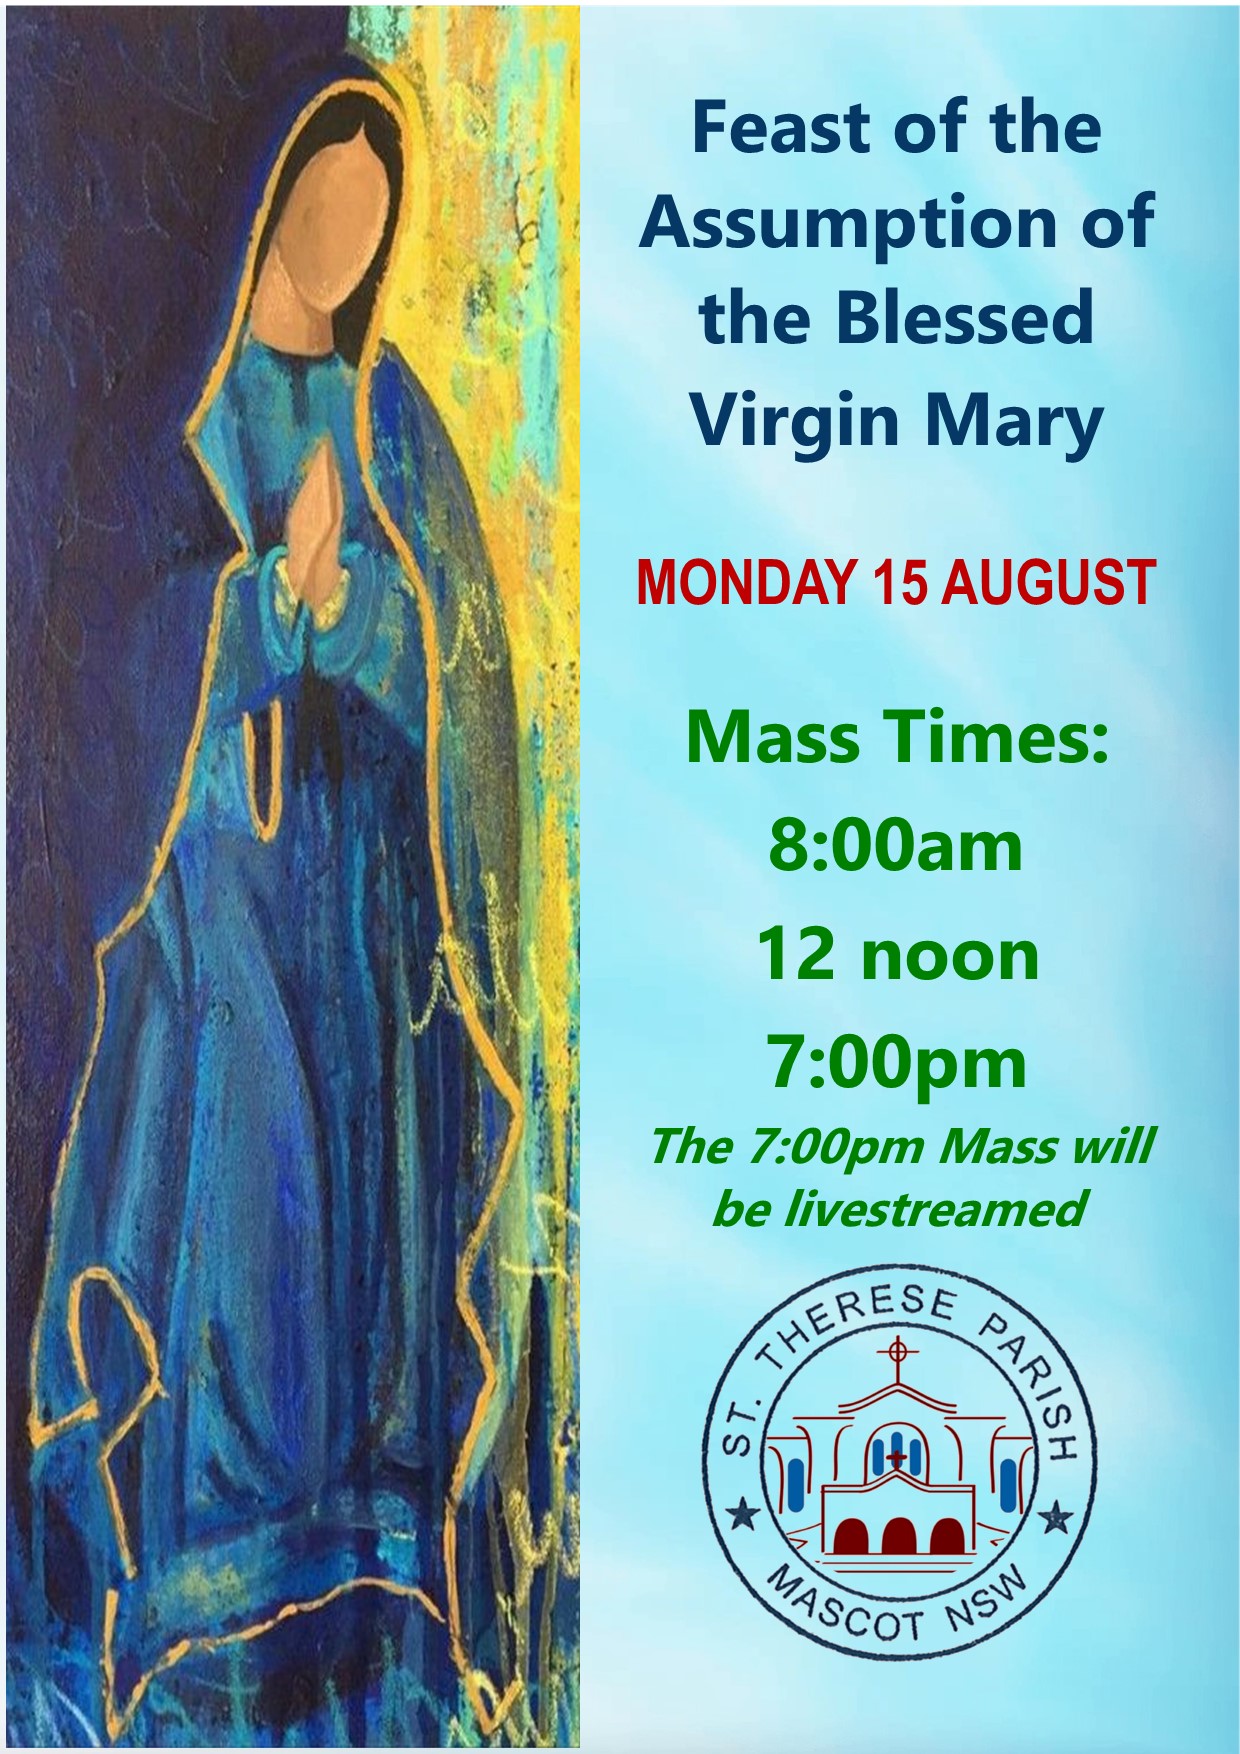 Feast of the Assumption of the Blessed Virgin Mary Monday 15 August, mass times 8am, 12 noon and 7pm. 7pm mass will be livestreamed